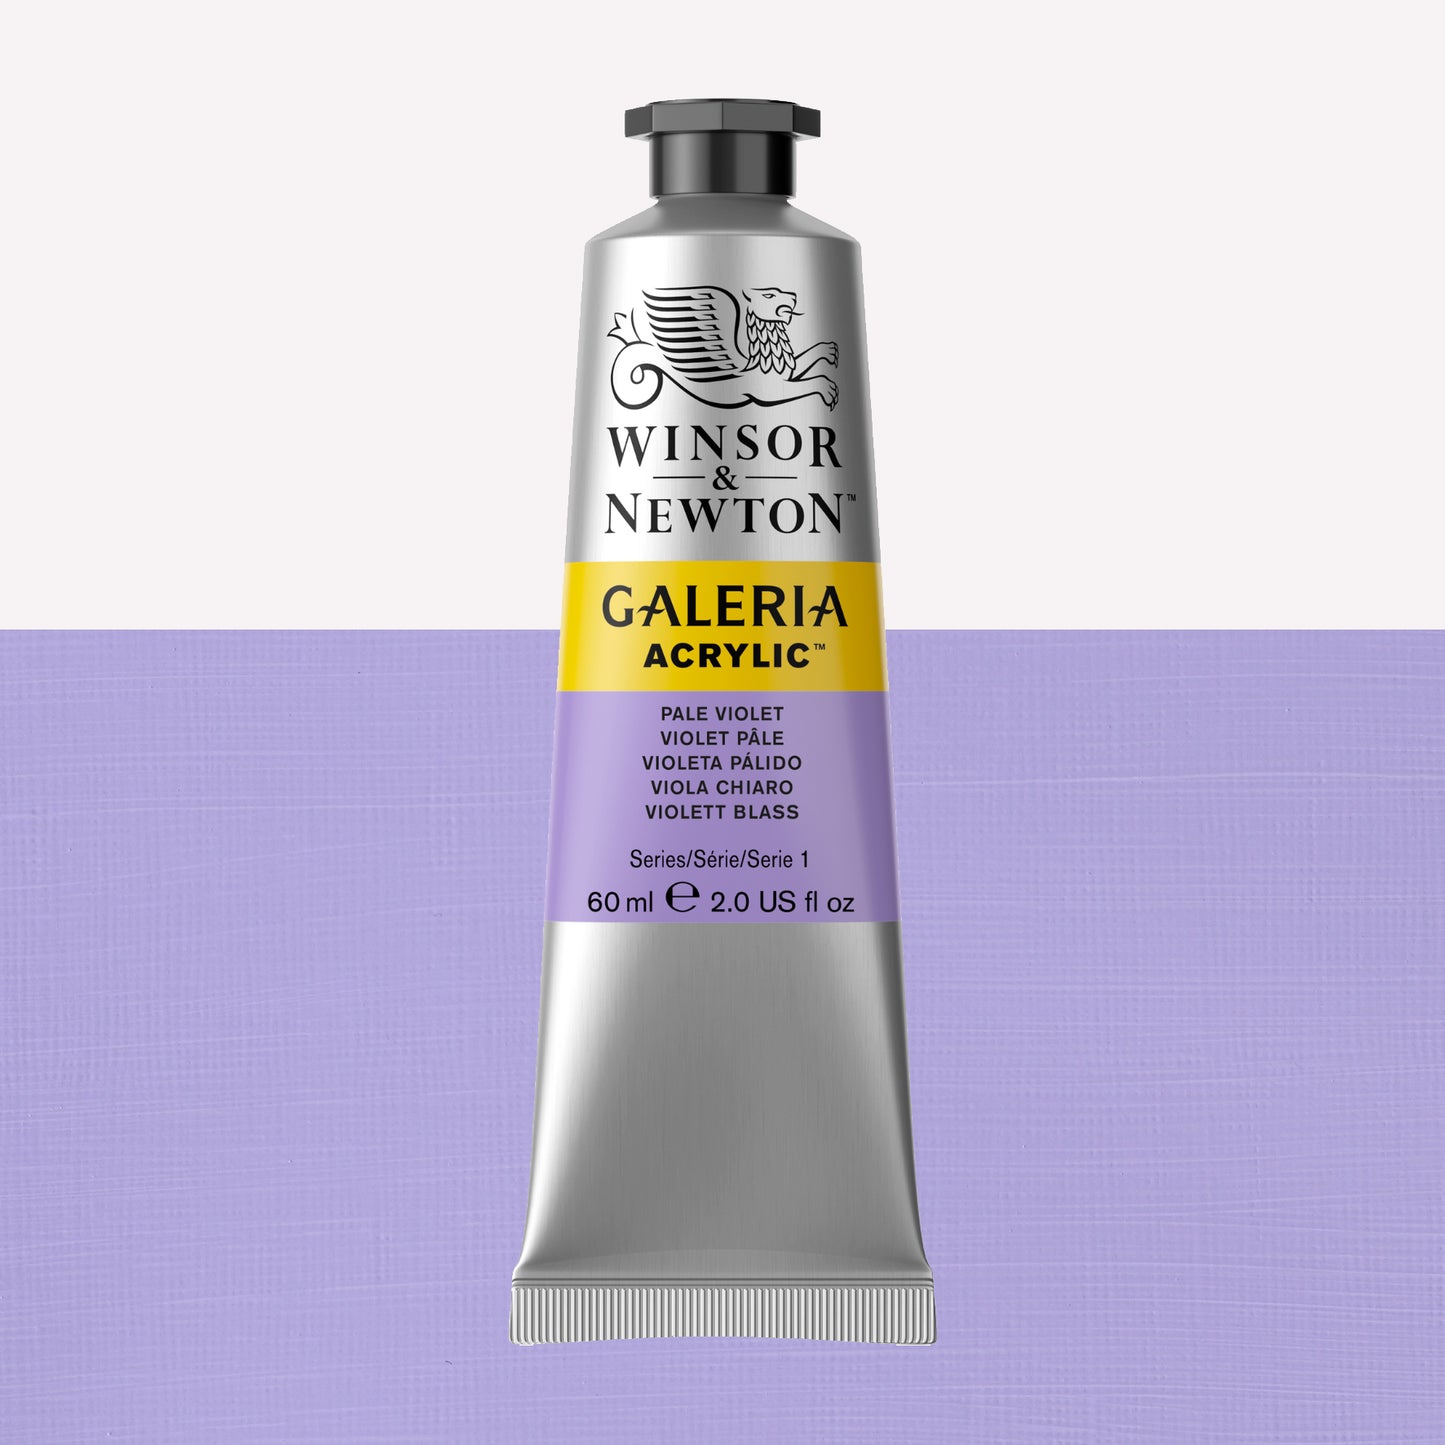 A 60ml tube of vibrant Galeria Acrylic paint in the shade Pale Violet. This professional-quality paint is packaged in a silver tube with a black lid. Made by Winsor and Newton.